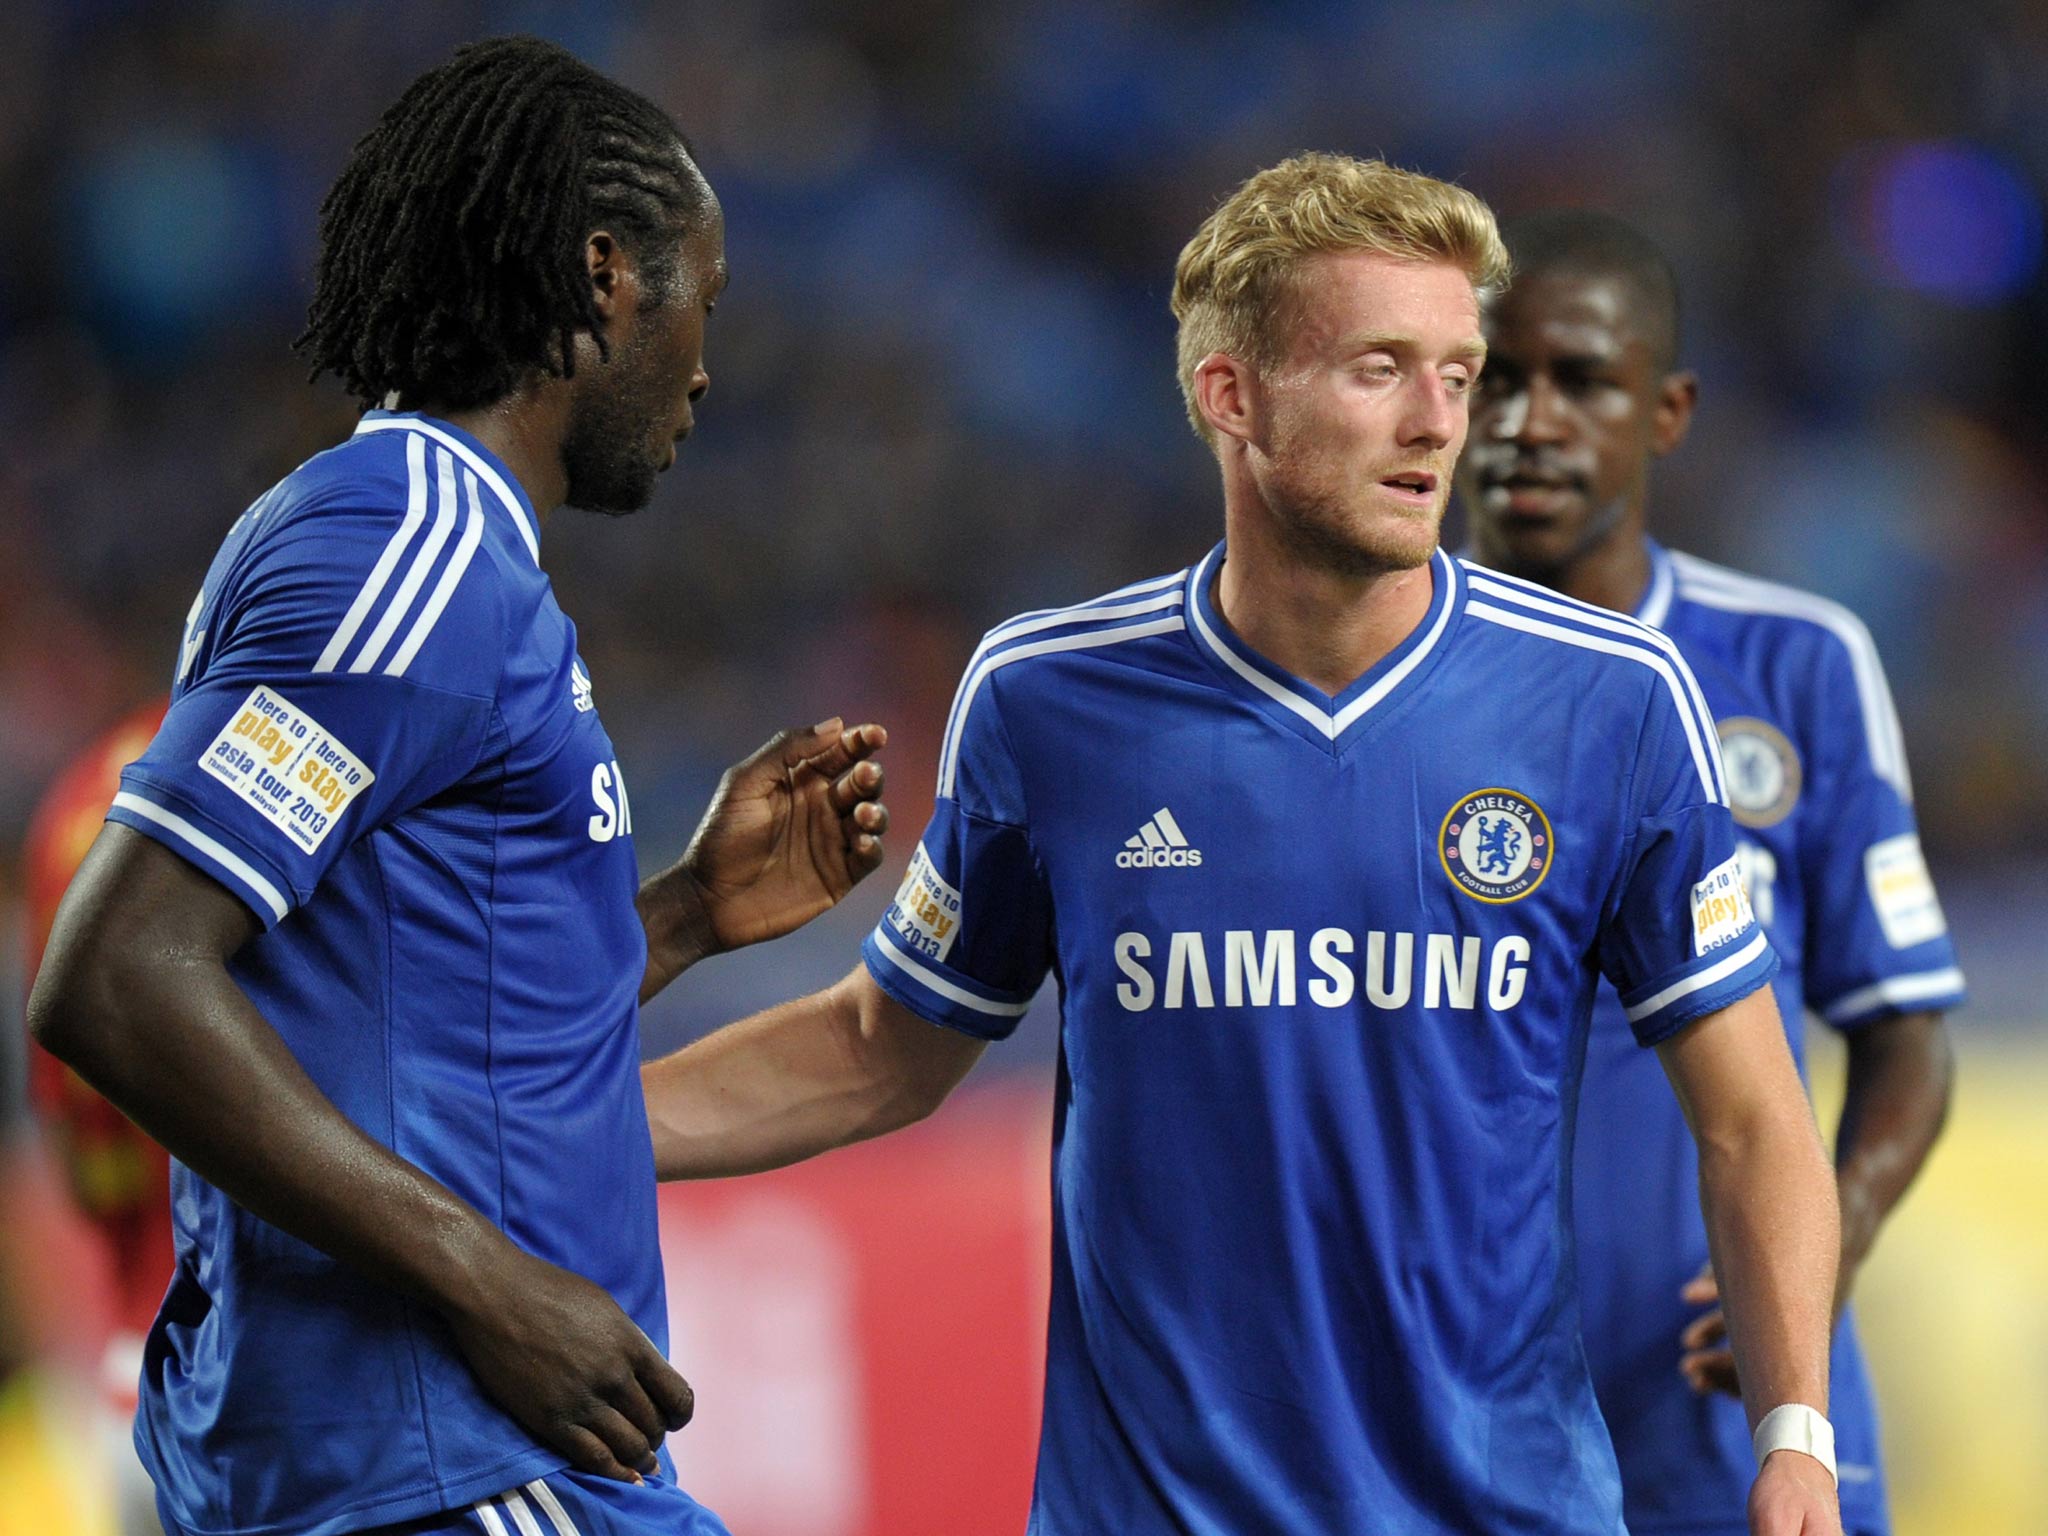 Andre Schurrle (right) will lead the line for Chelsea against PSG